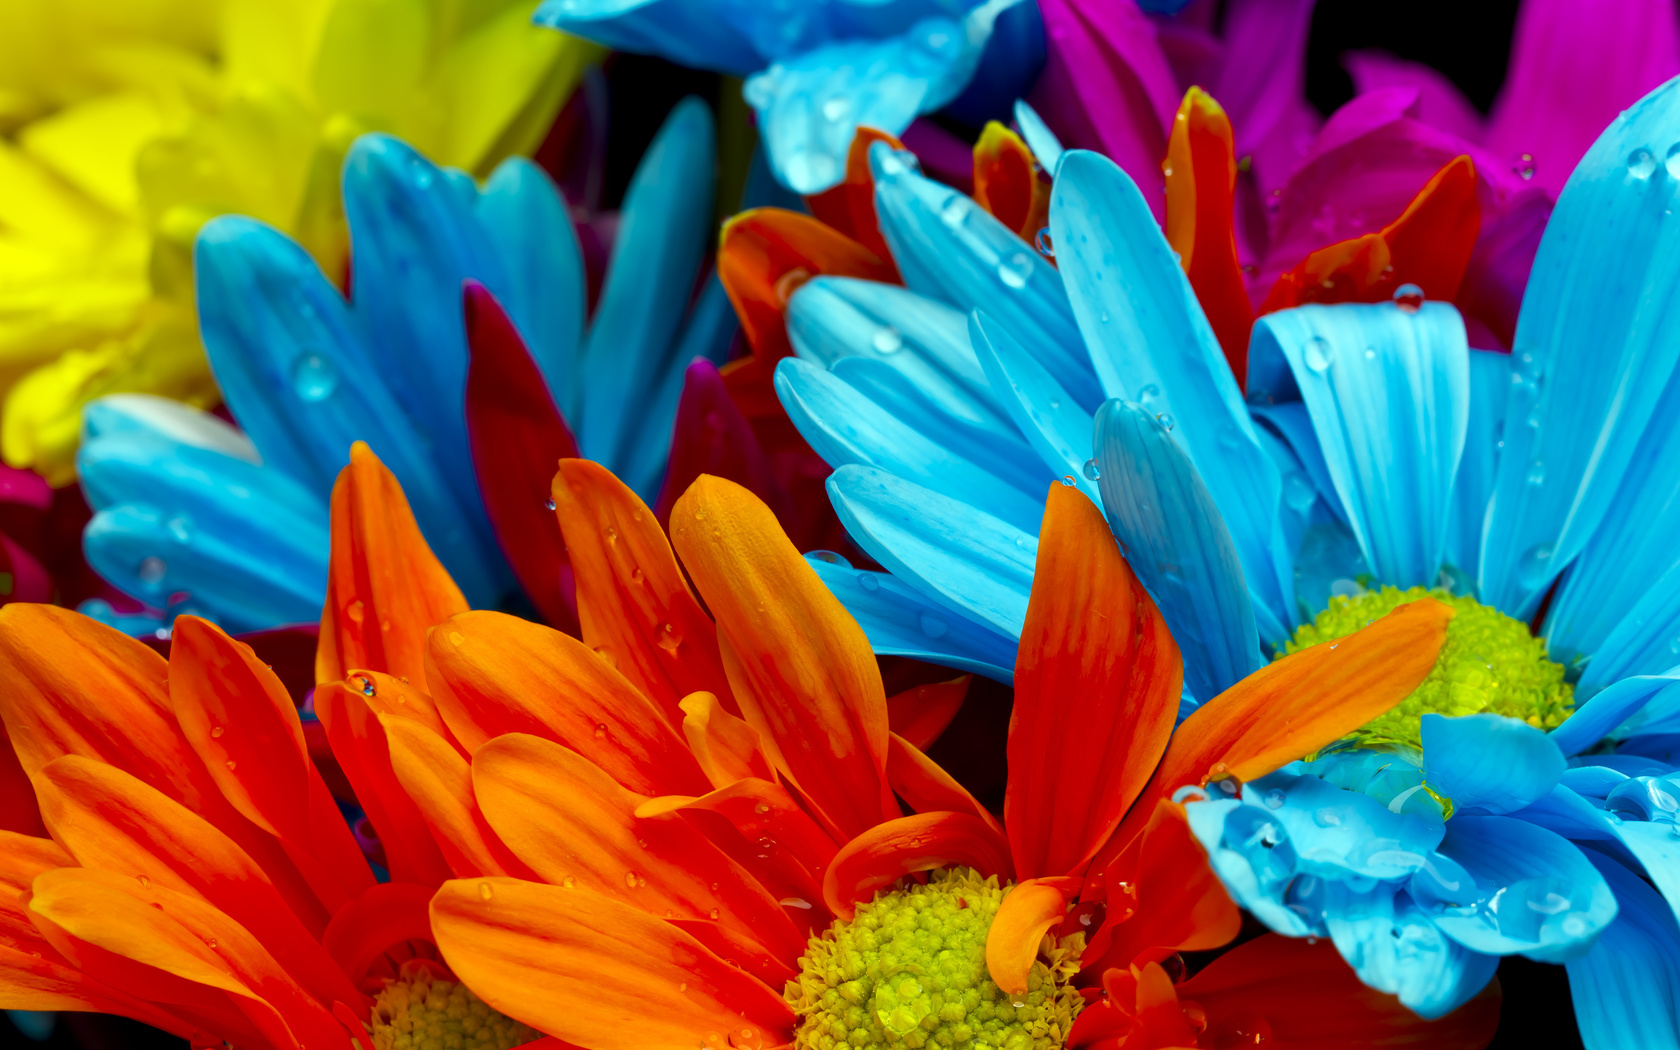 violet, lactic, Bright colorful flowers, orange, red, water drops